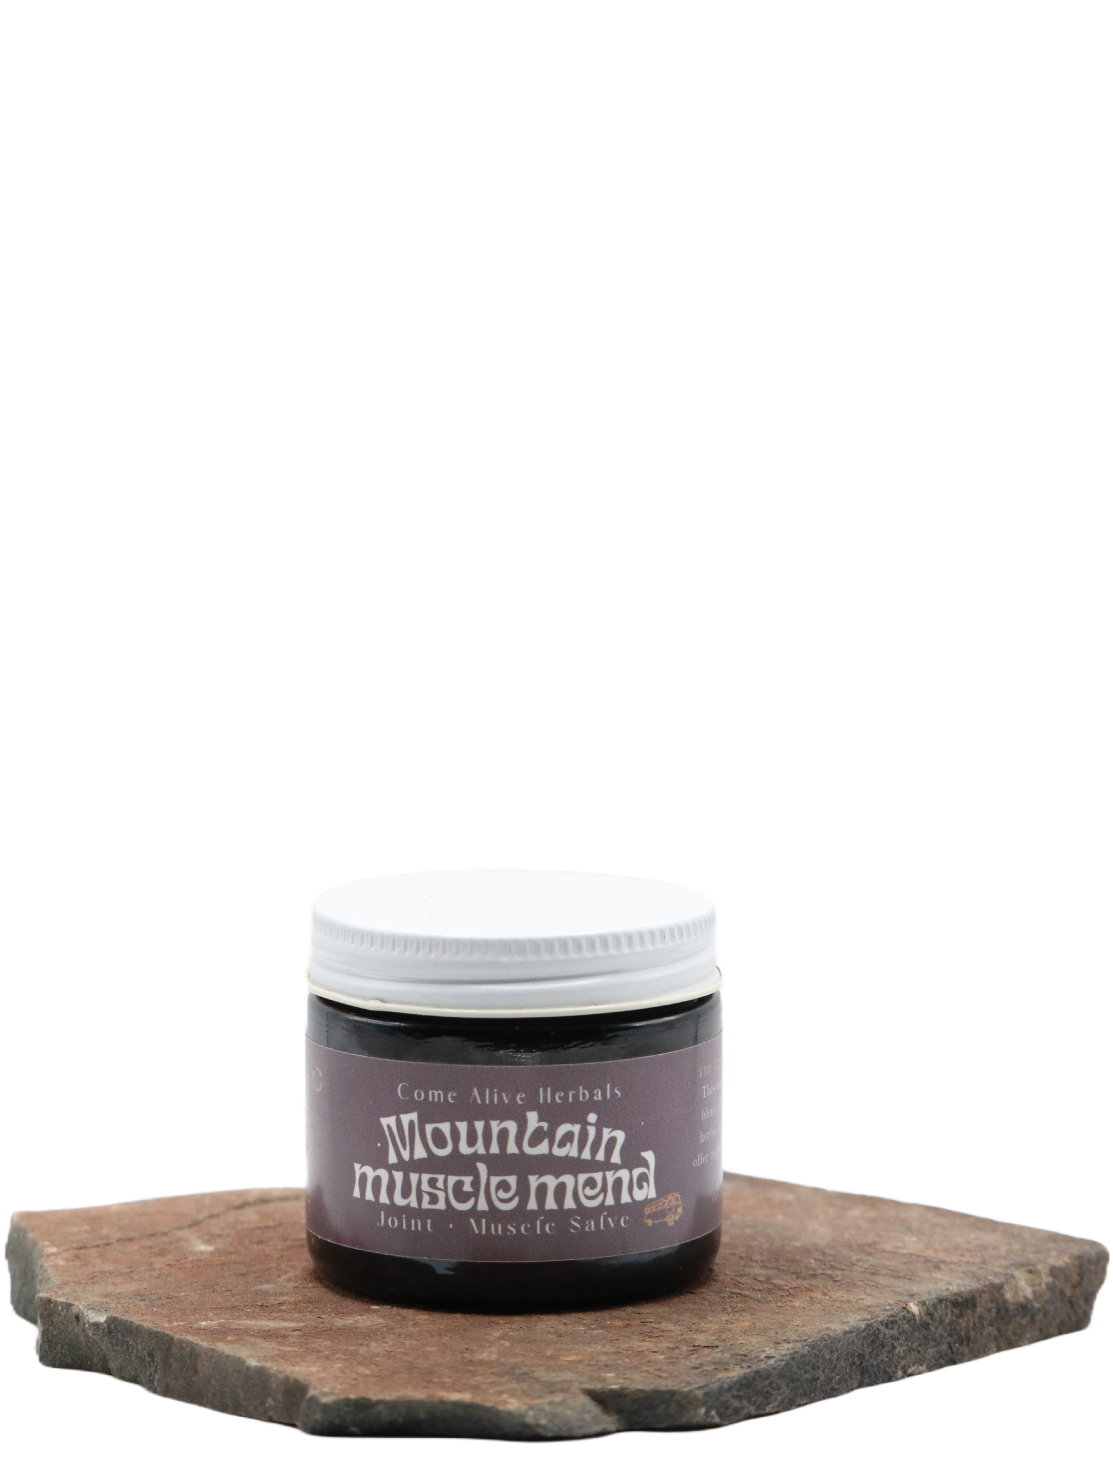 Mountain Muscle Mend by Come Alive Herbals